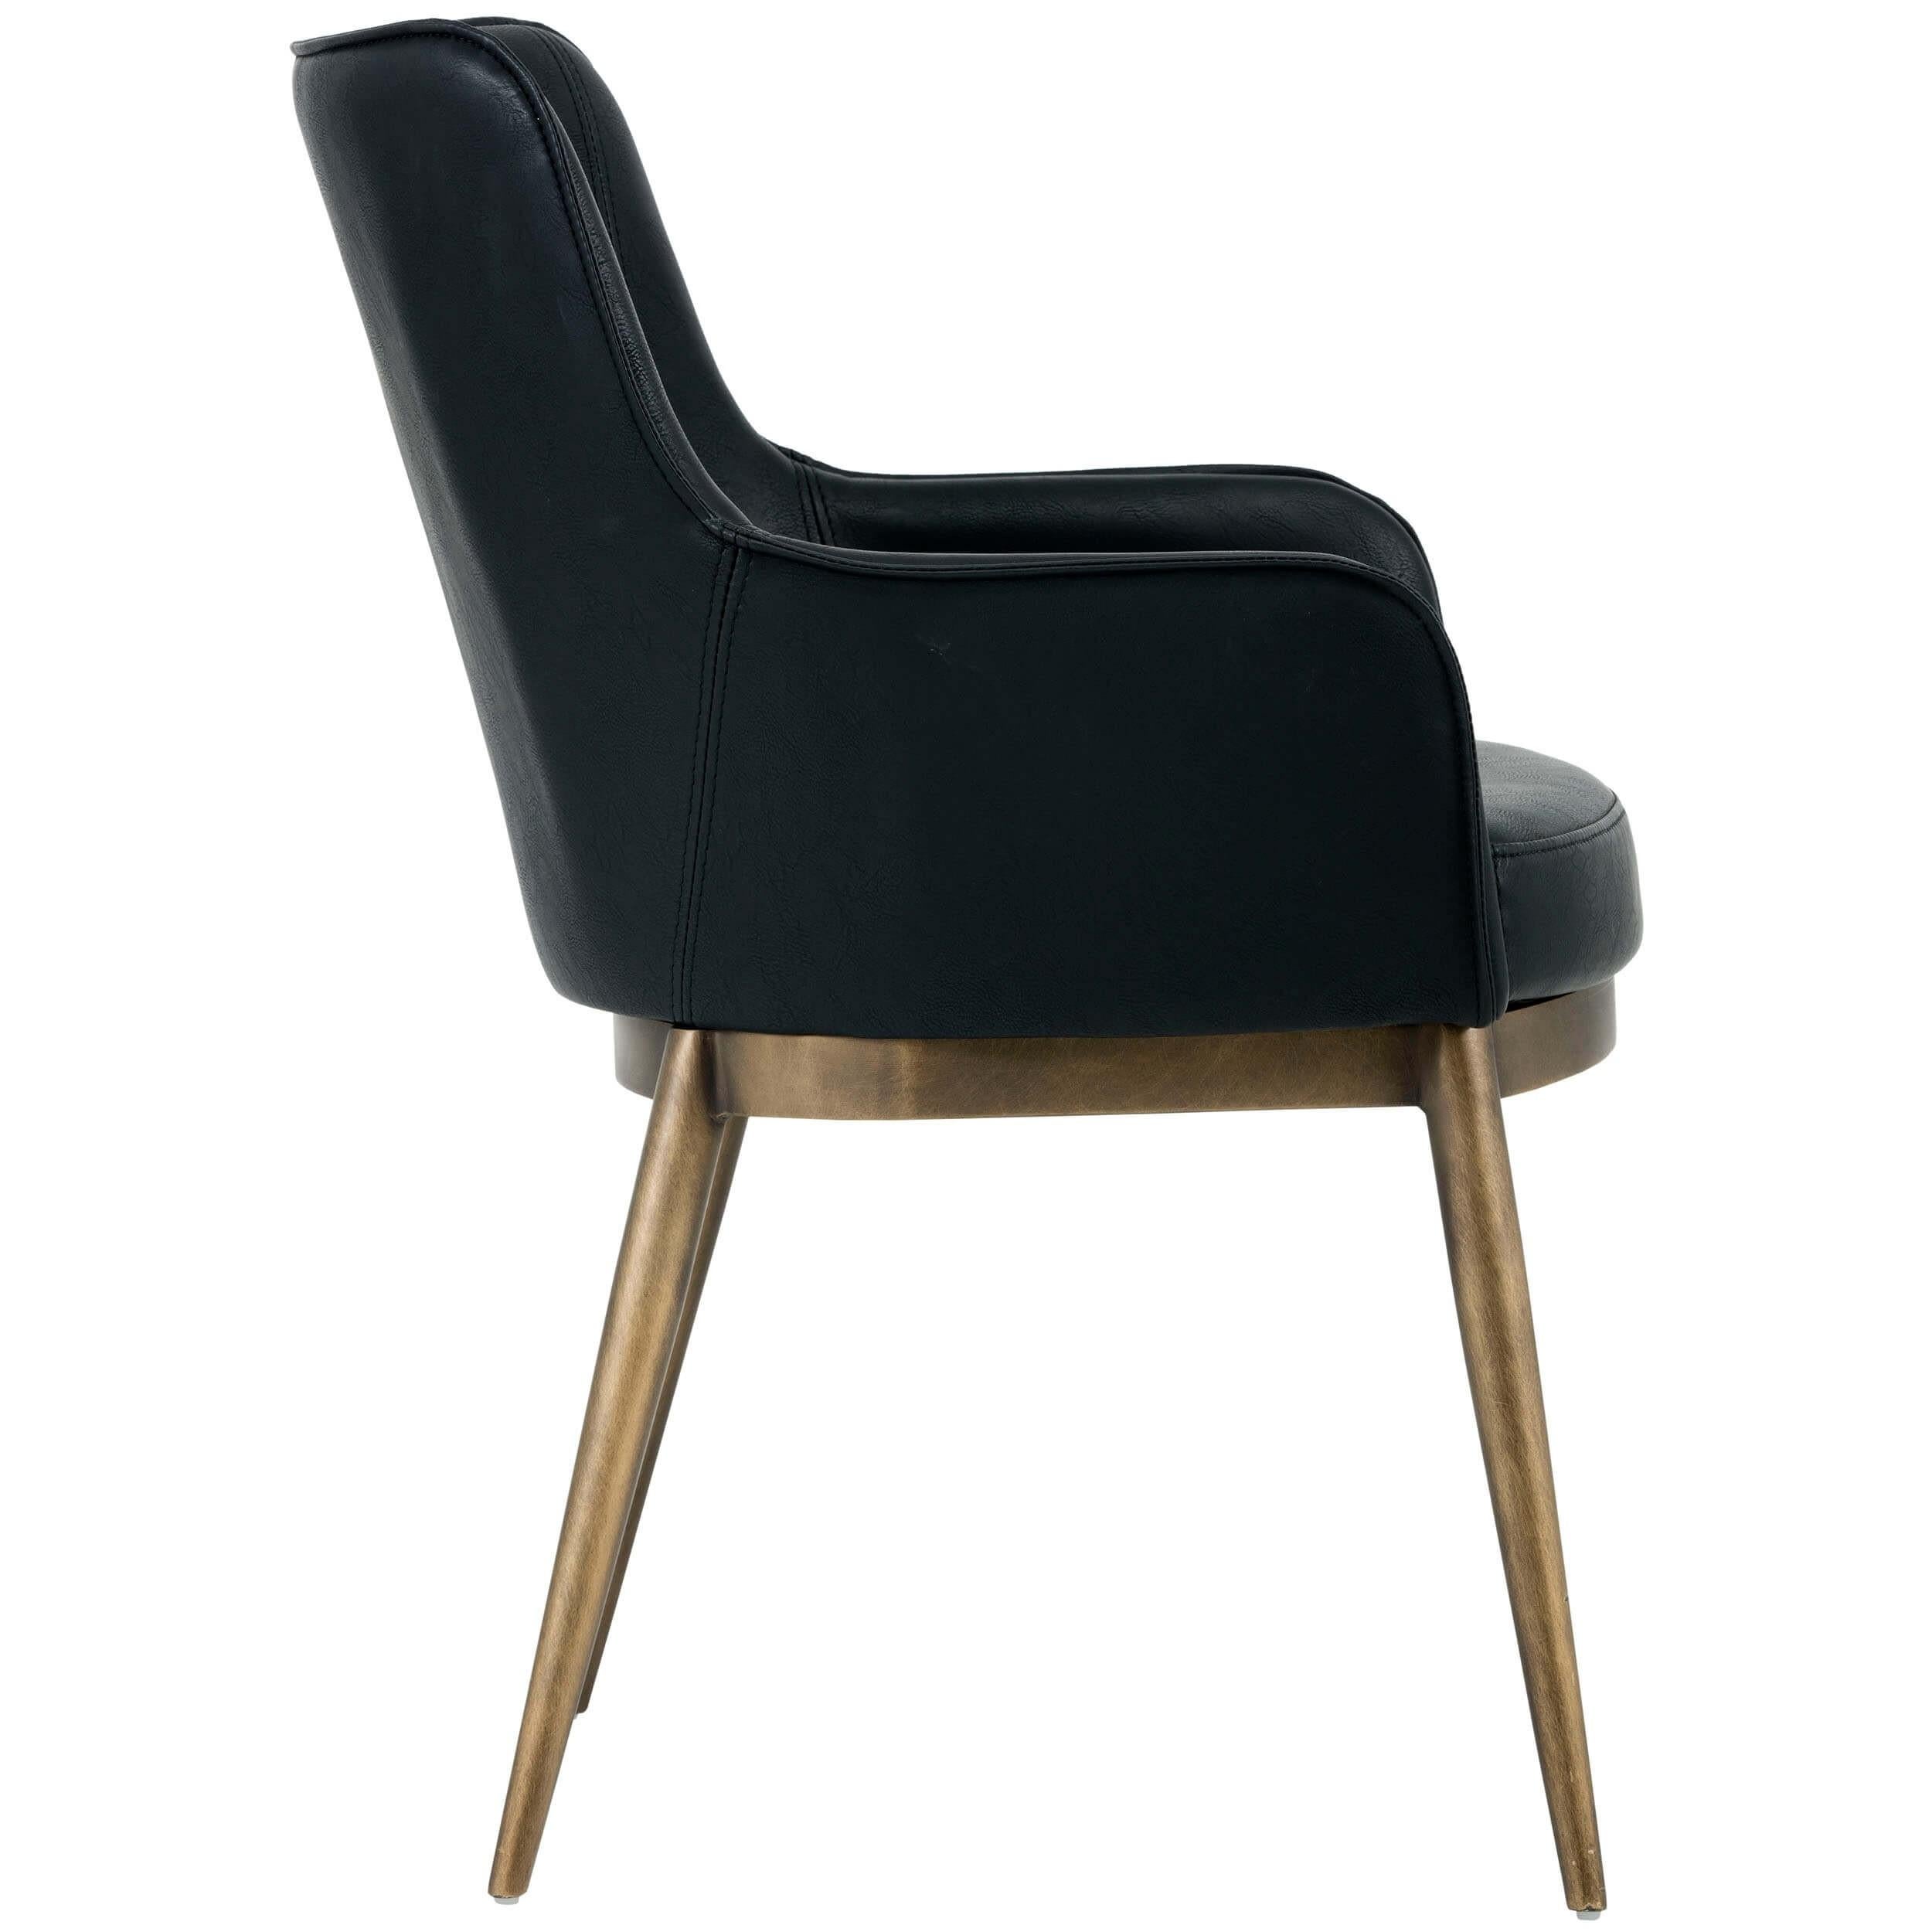 Compact with a semi-circular back, this set of 6 armed dining chairs feature a mid-century modern touch and an ergonomic design.

Perfect for dinner parties, the comfortable upholstered seat and curved backrest provide support for those gathered